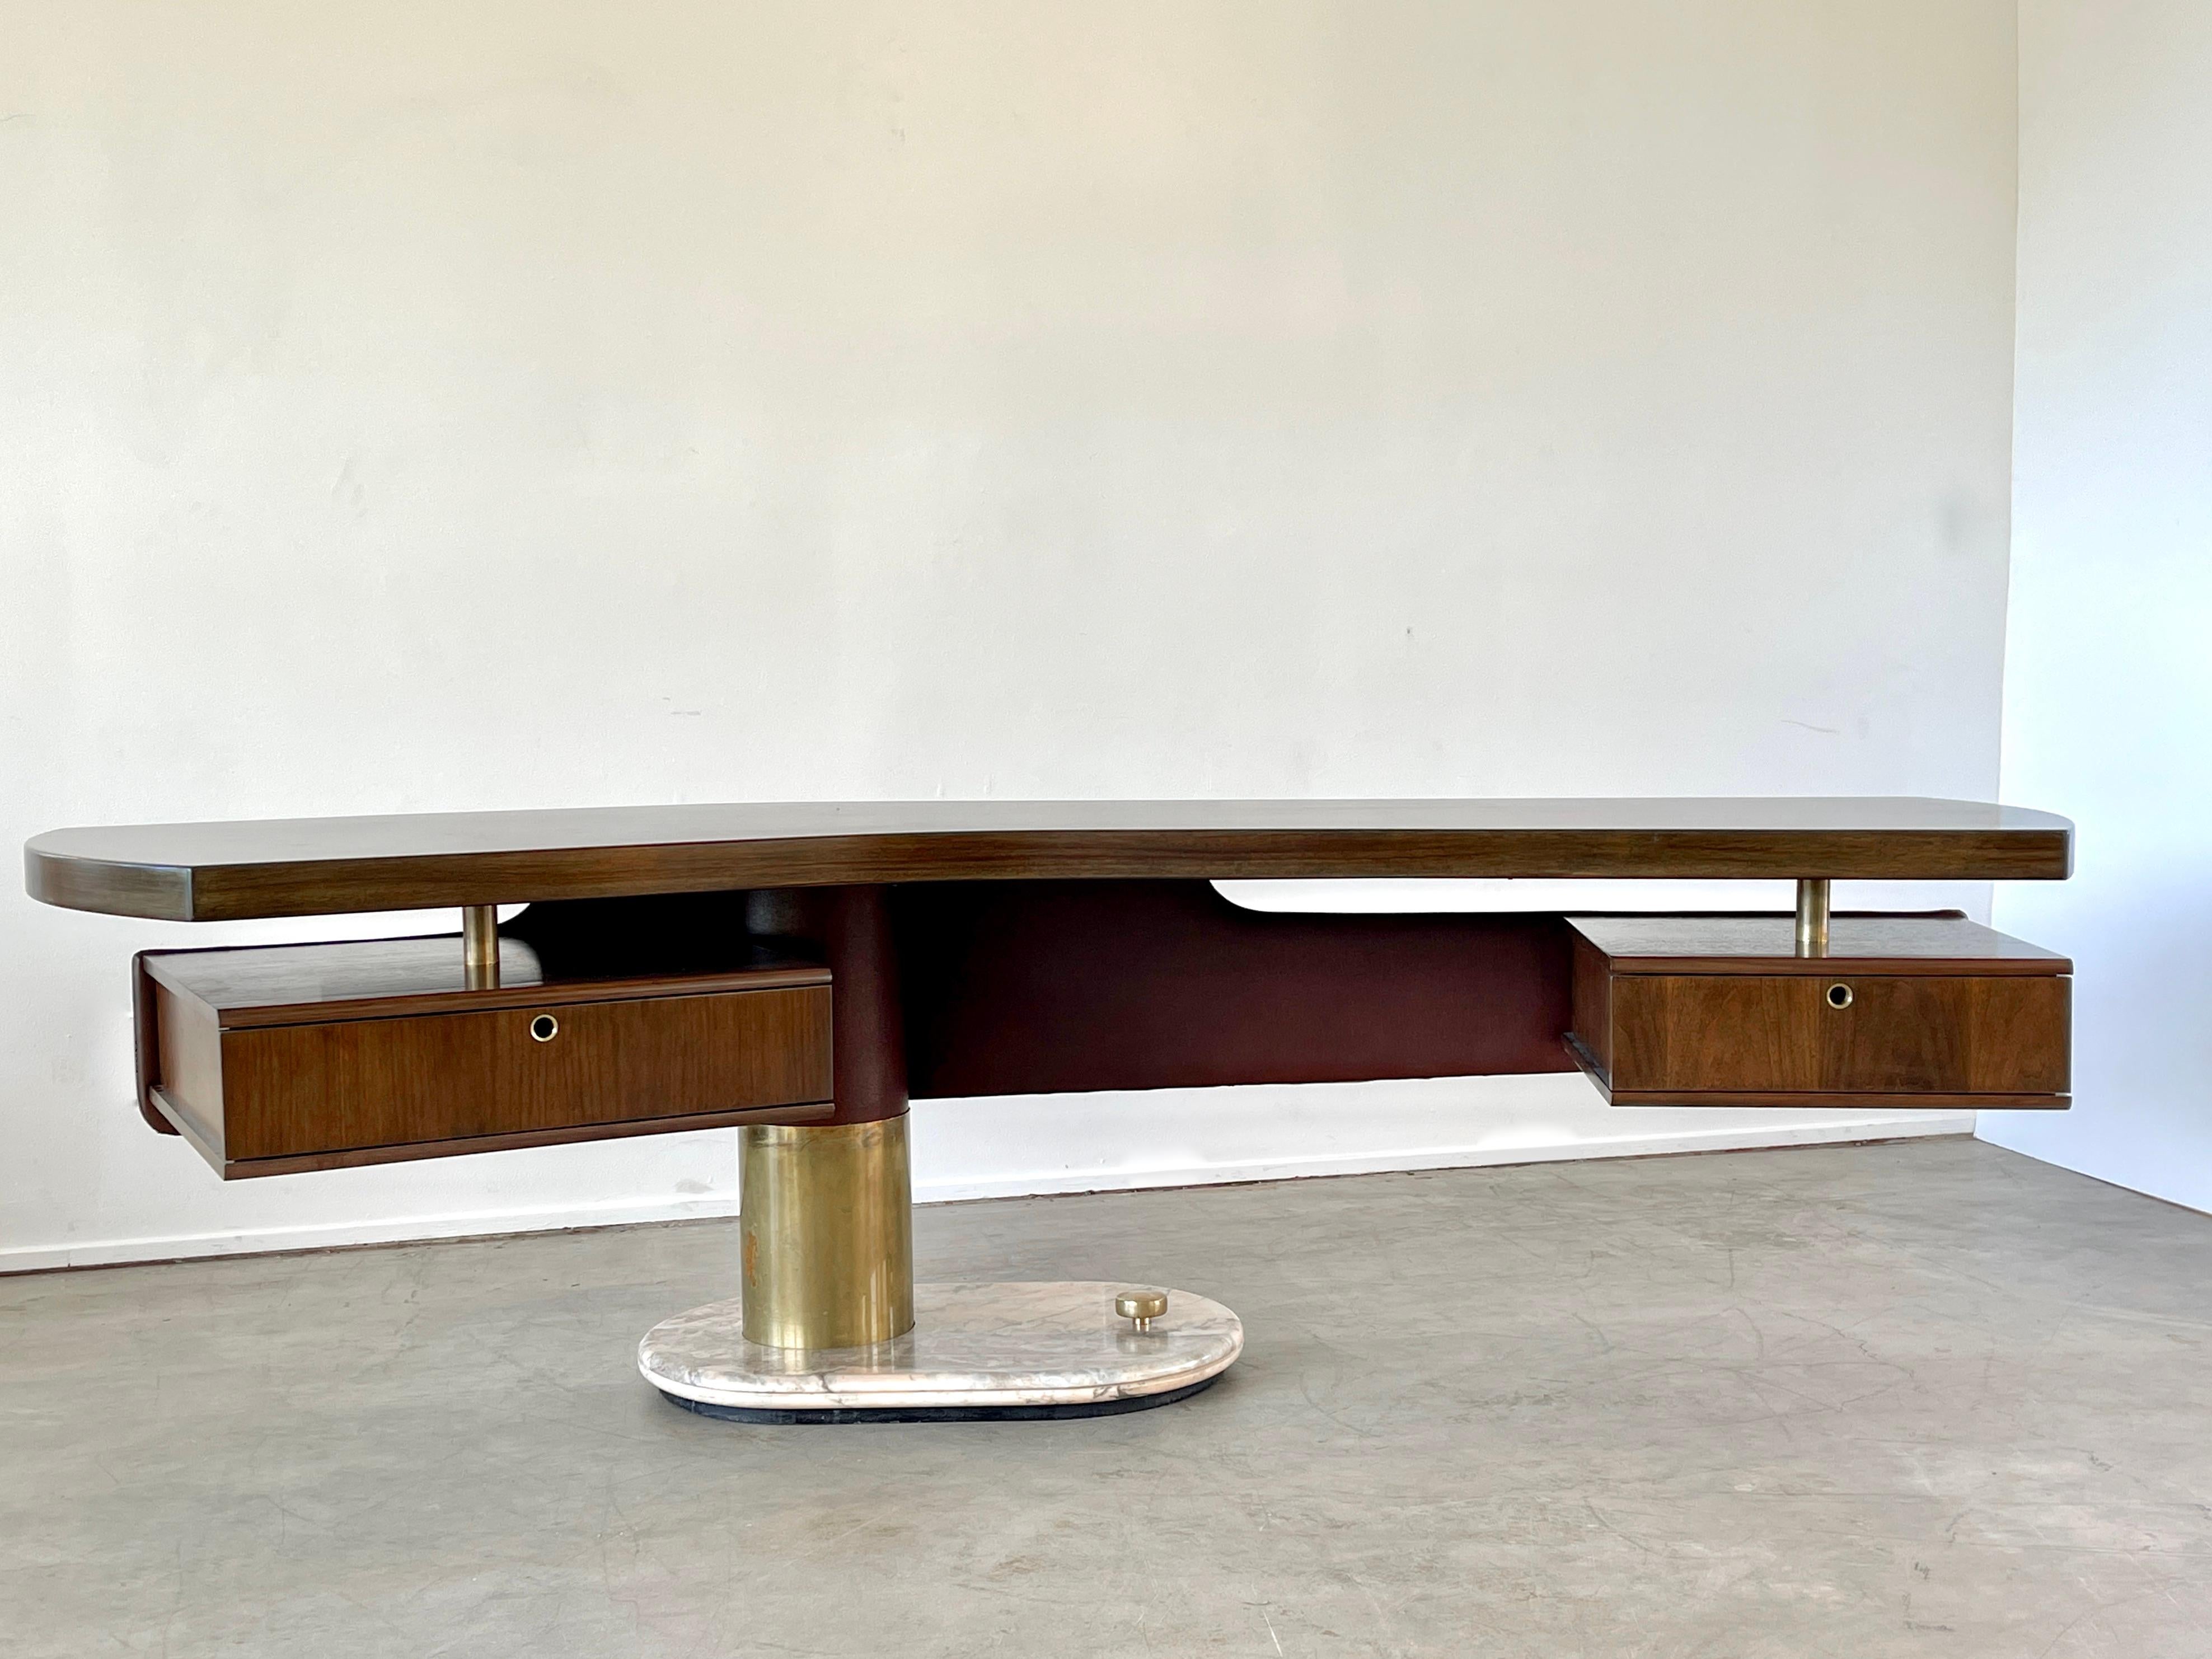 An incredible Italian desk by artist Renzo Schirolli -
Boomerang shaped walnut top with floating leatherette covered modesty panel with floating pedestal drawers - which have original red lacquer interiors. 
Cylindrical bronze column sits on solid